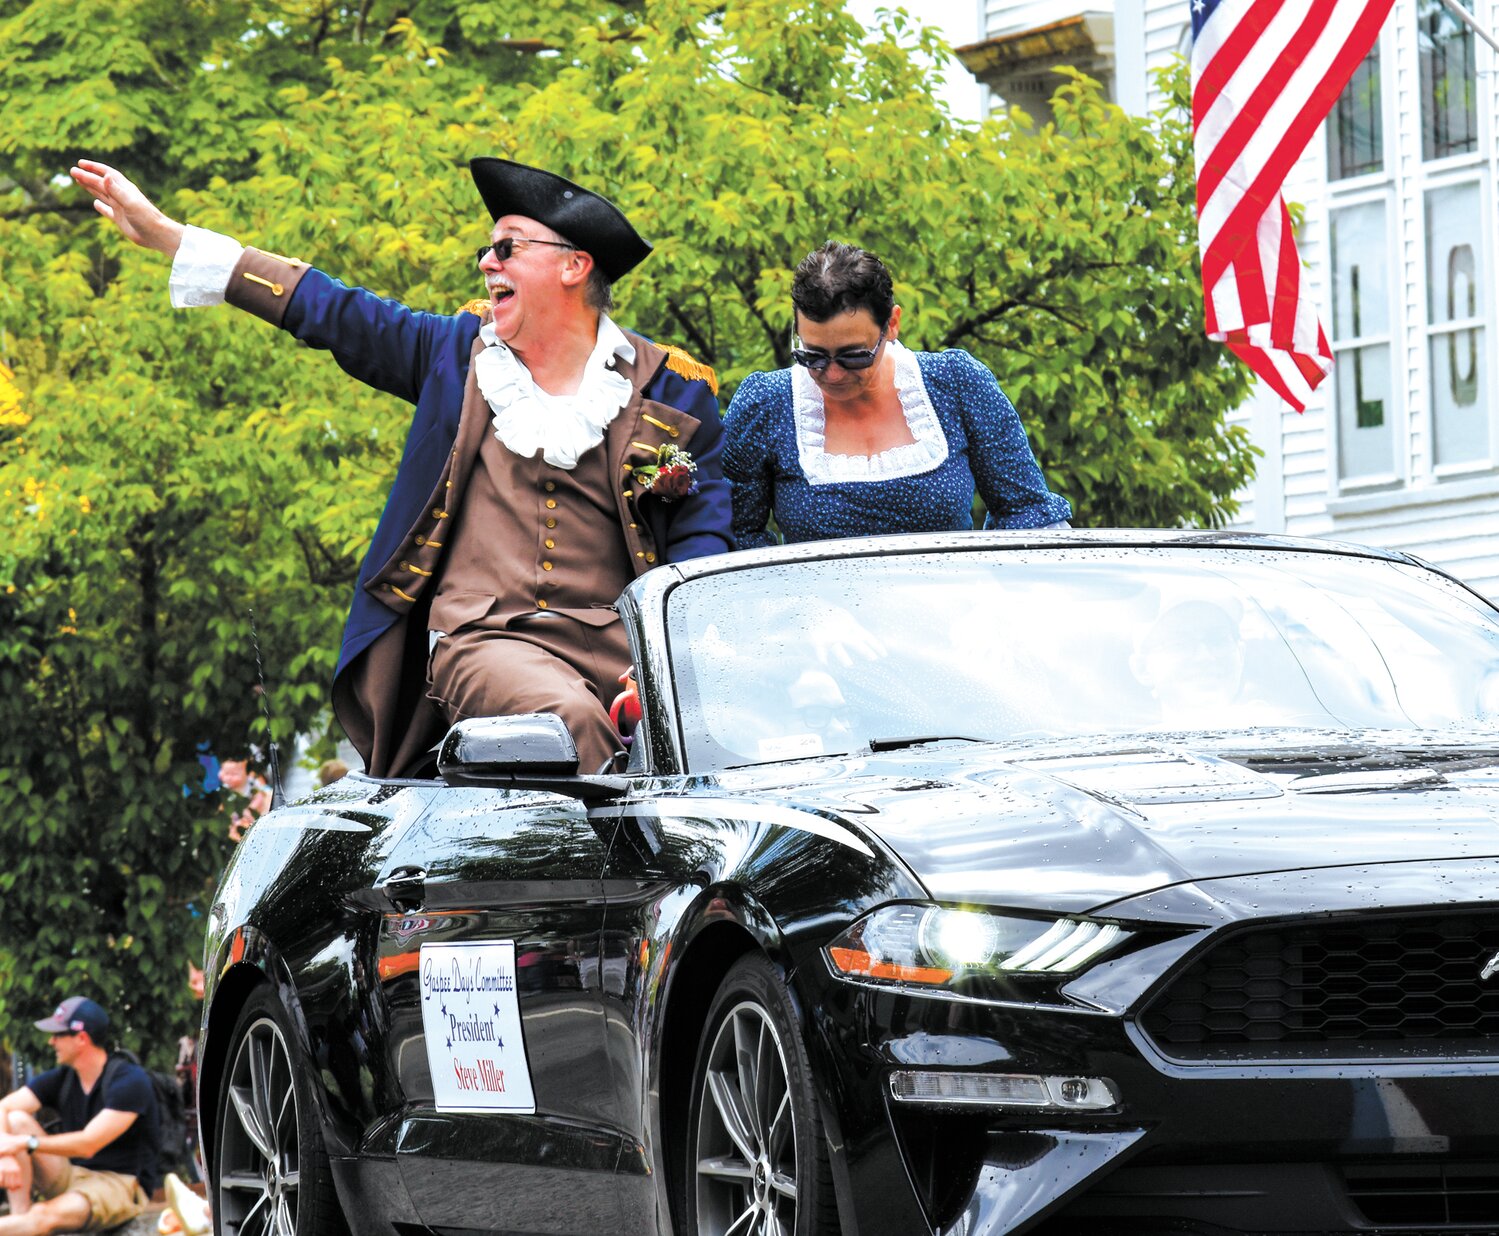 WHAT HE LOVES: Gaspee Days president Steve Miller accompanied by his wife, Tracey, waves to parade spectators Saturday. (Cranston Herald photo)